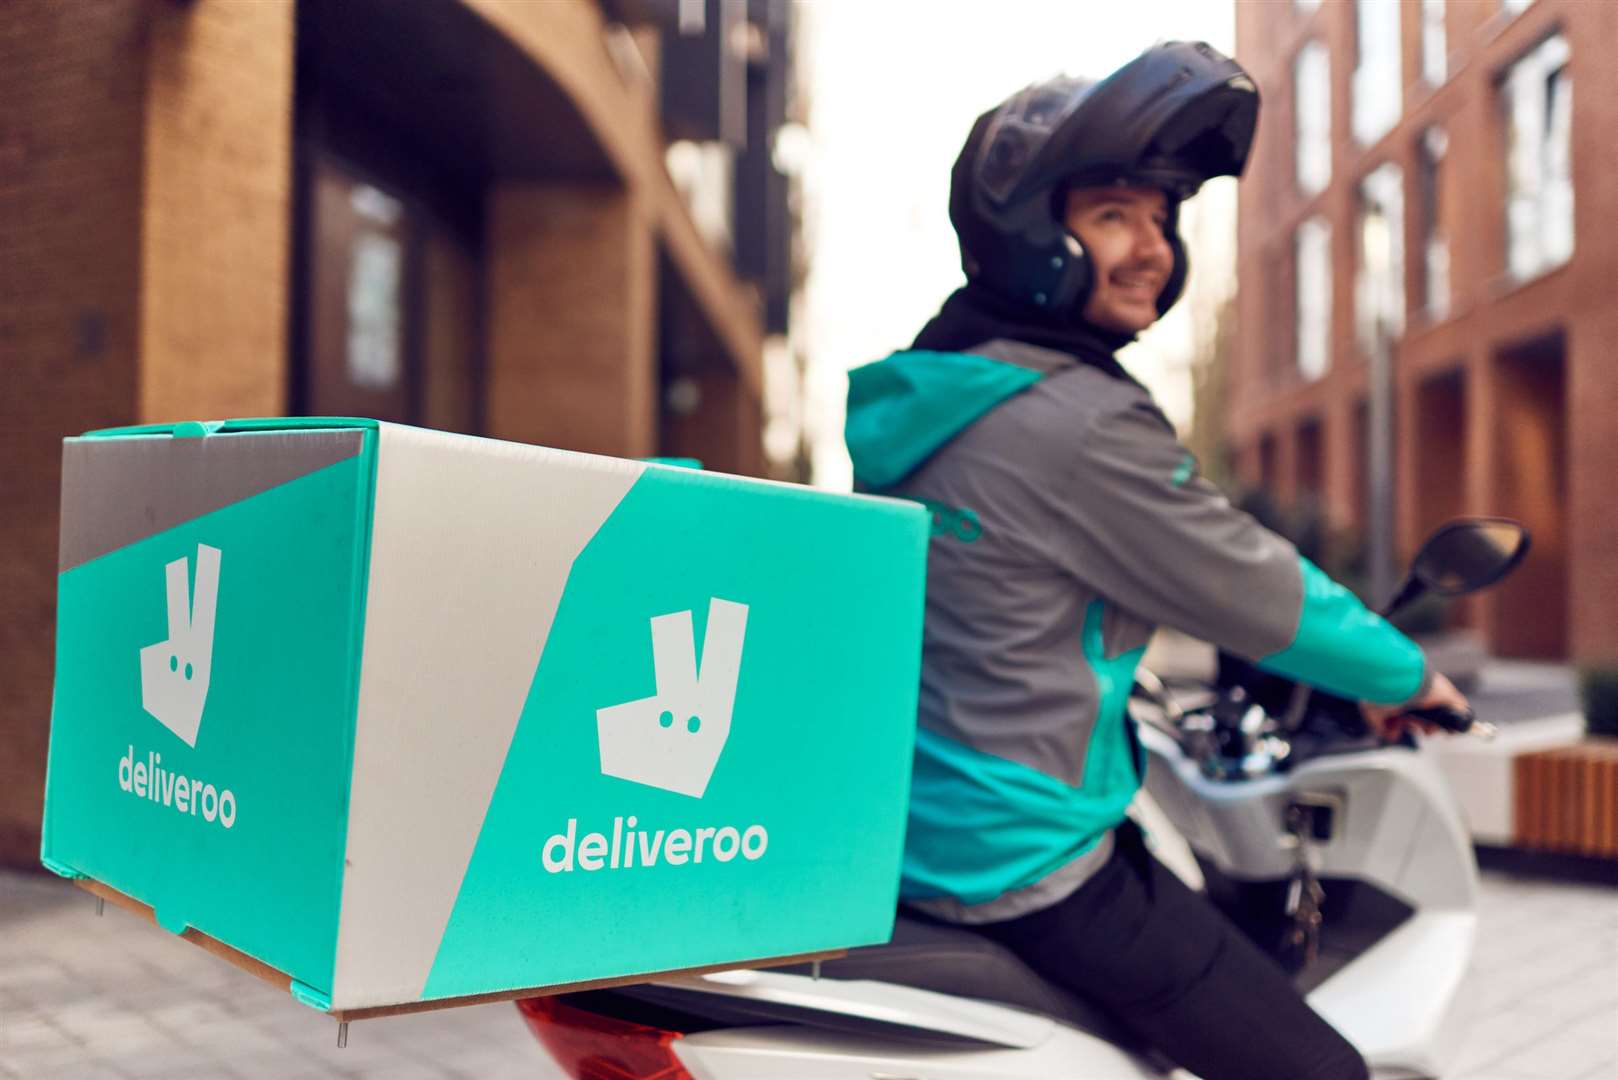 Deliveroo has expanded its partnership with the discount supermarket